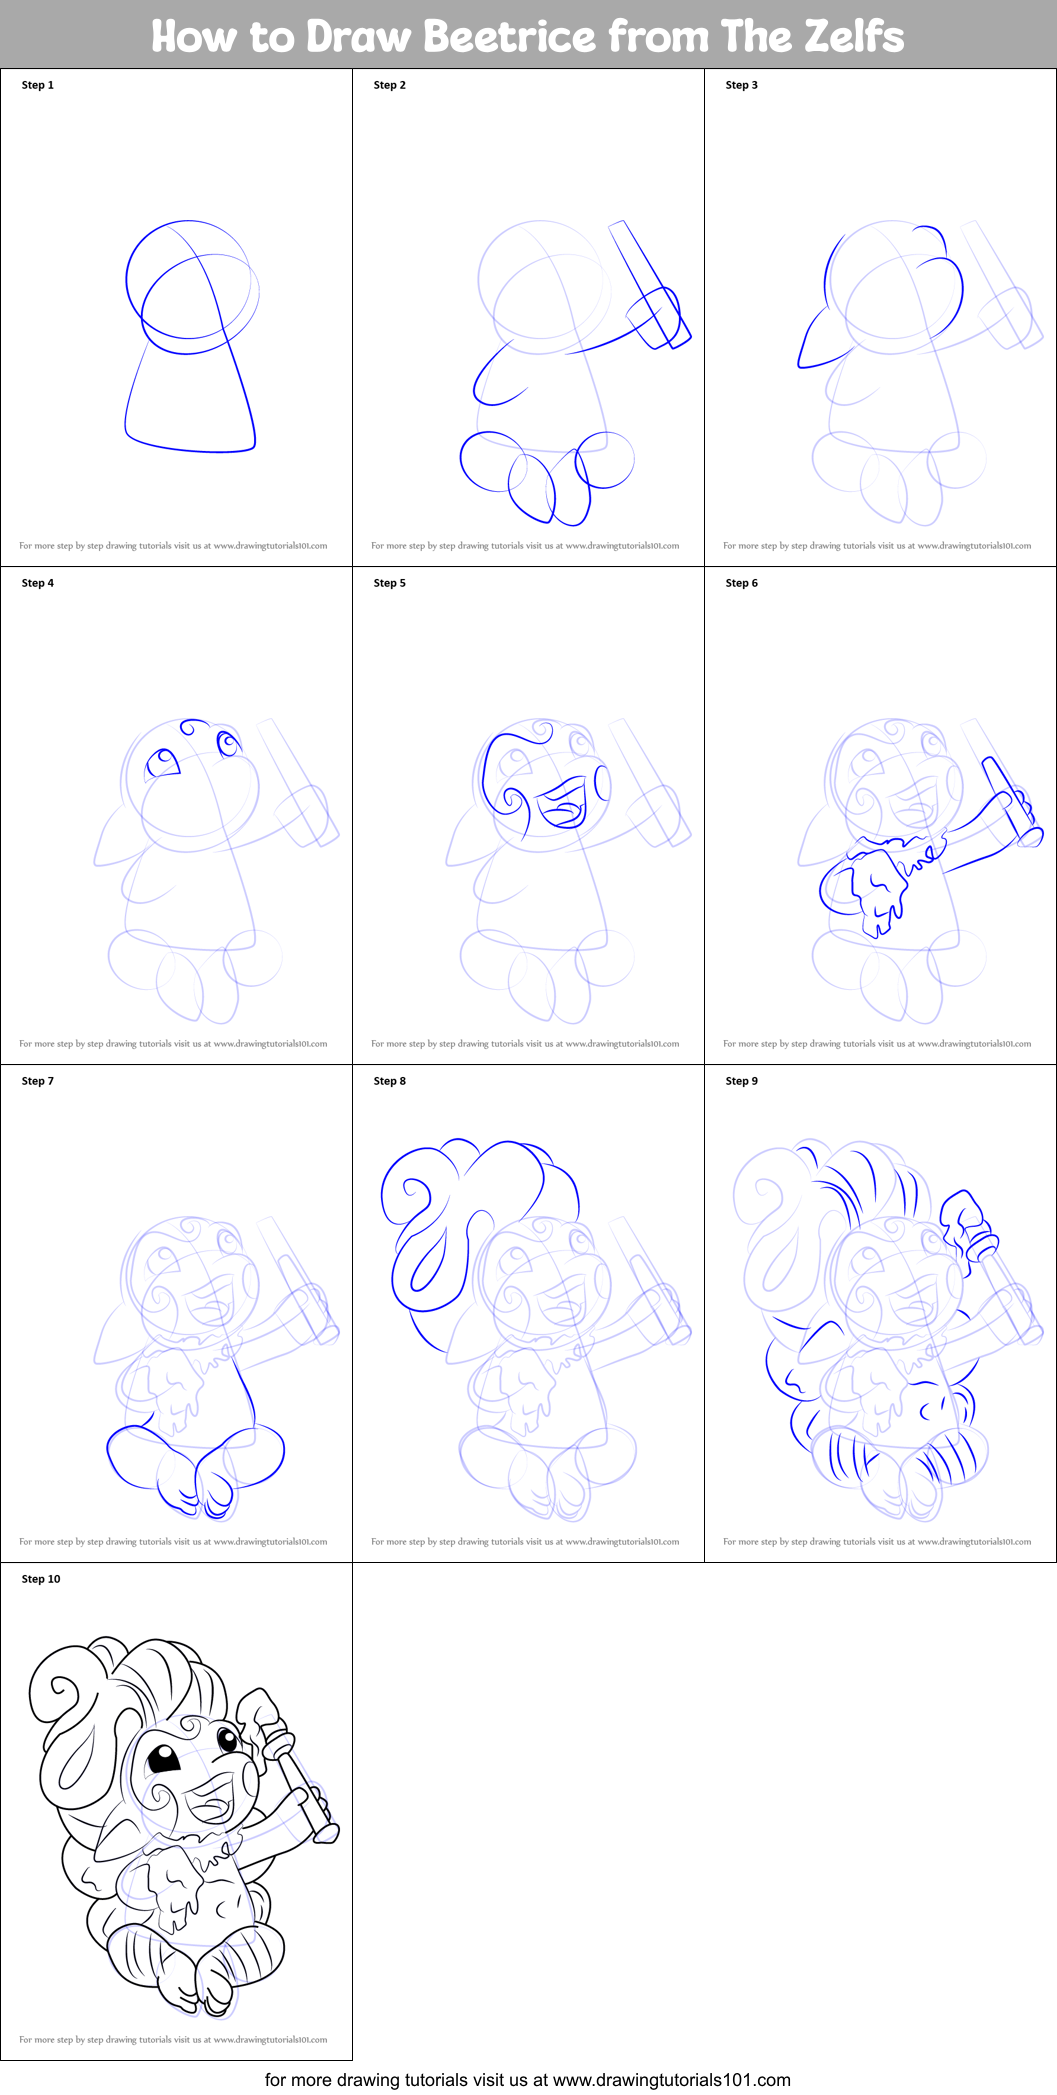 How to Draw Beetrice from The Zelfs (The Zelfs) Step by Step ...